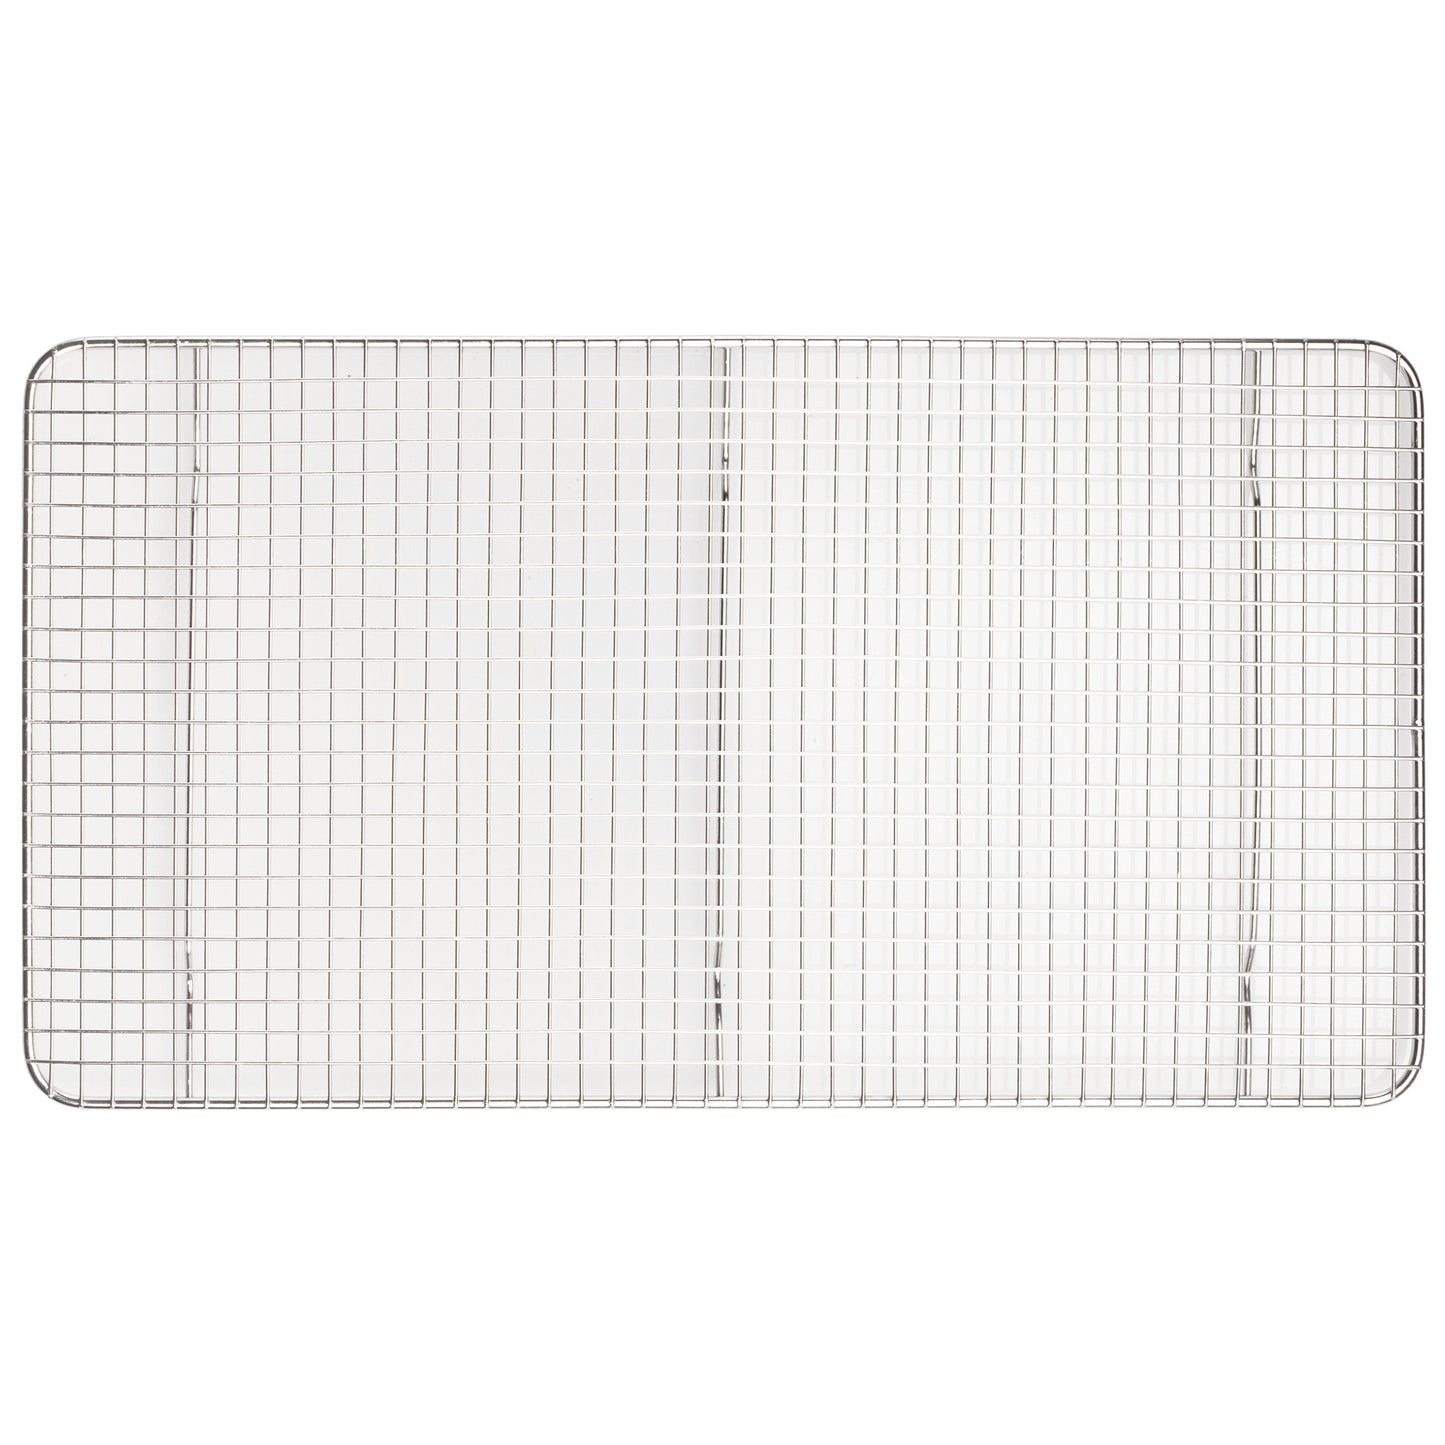 PGWS-1018 - Pan Grate for Steam Pan, Stainless Steel - Full